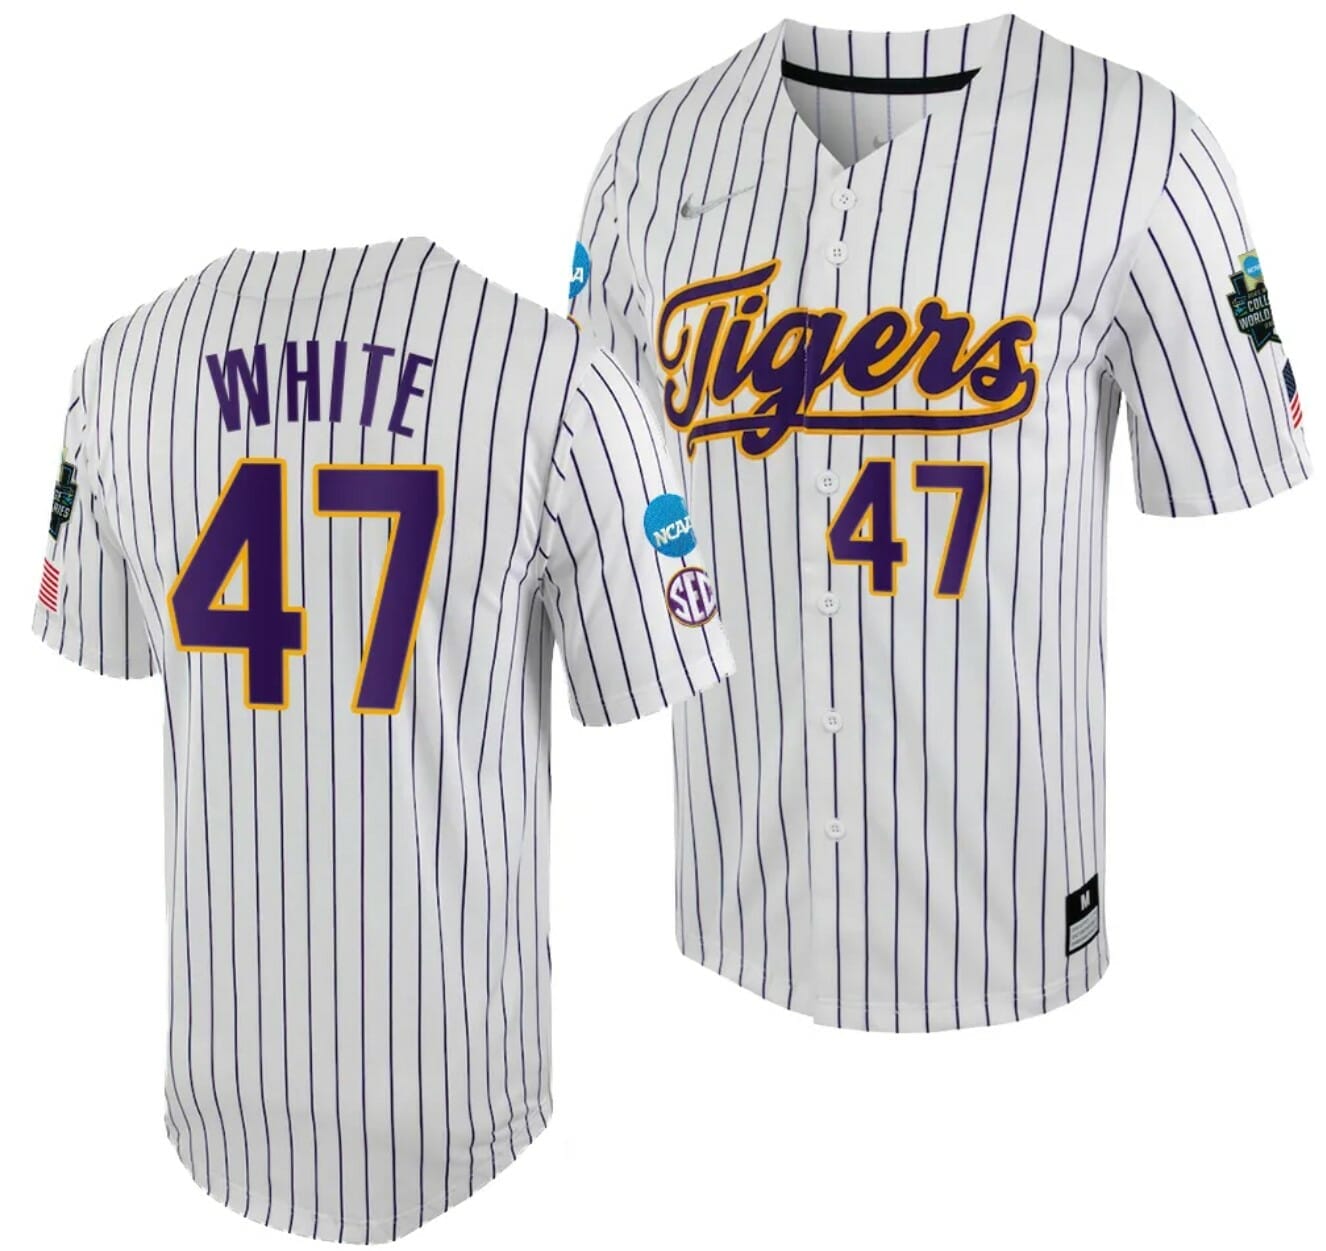 Tigers appear to be pondering adding another uniform